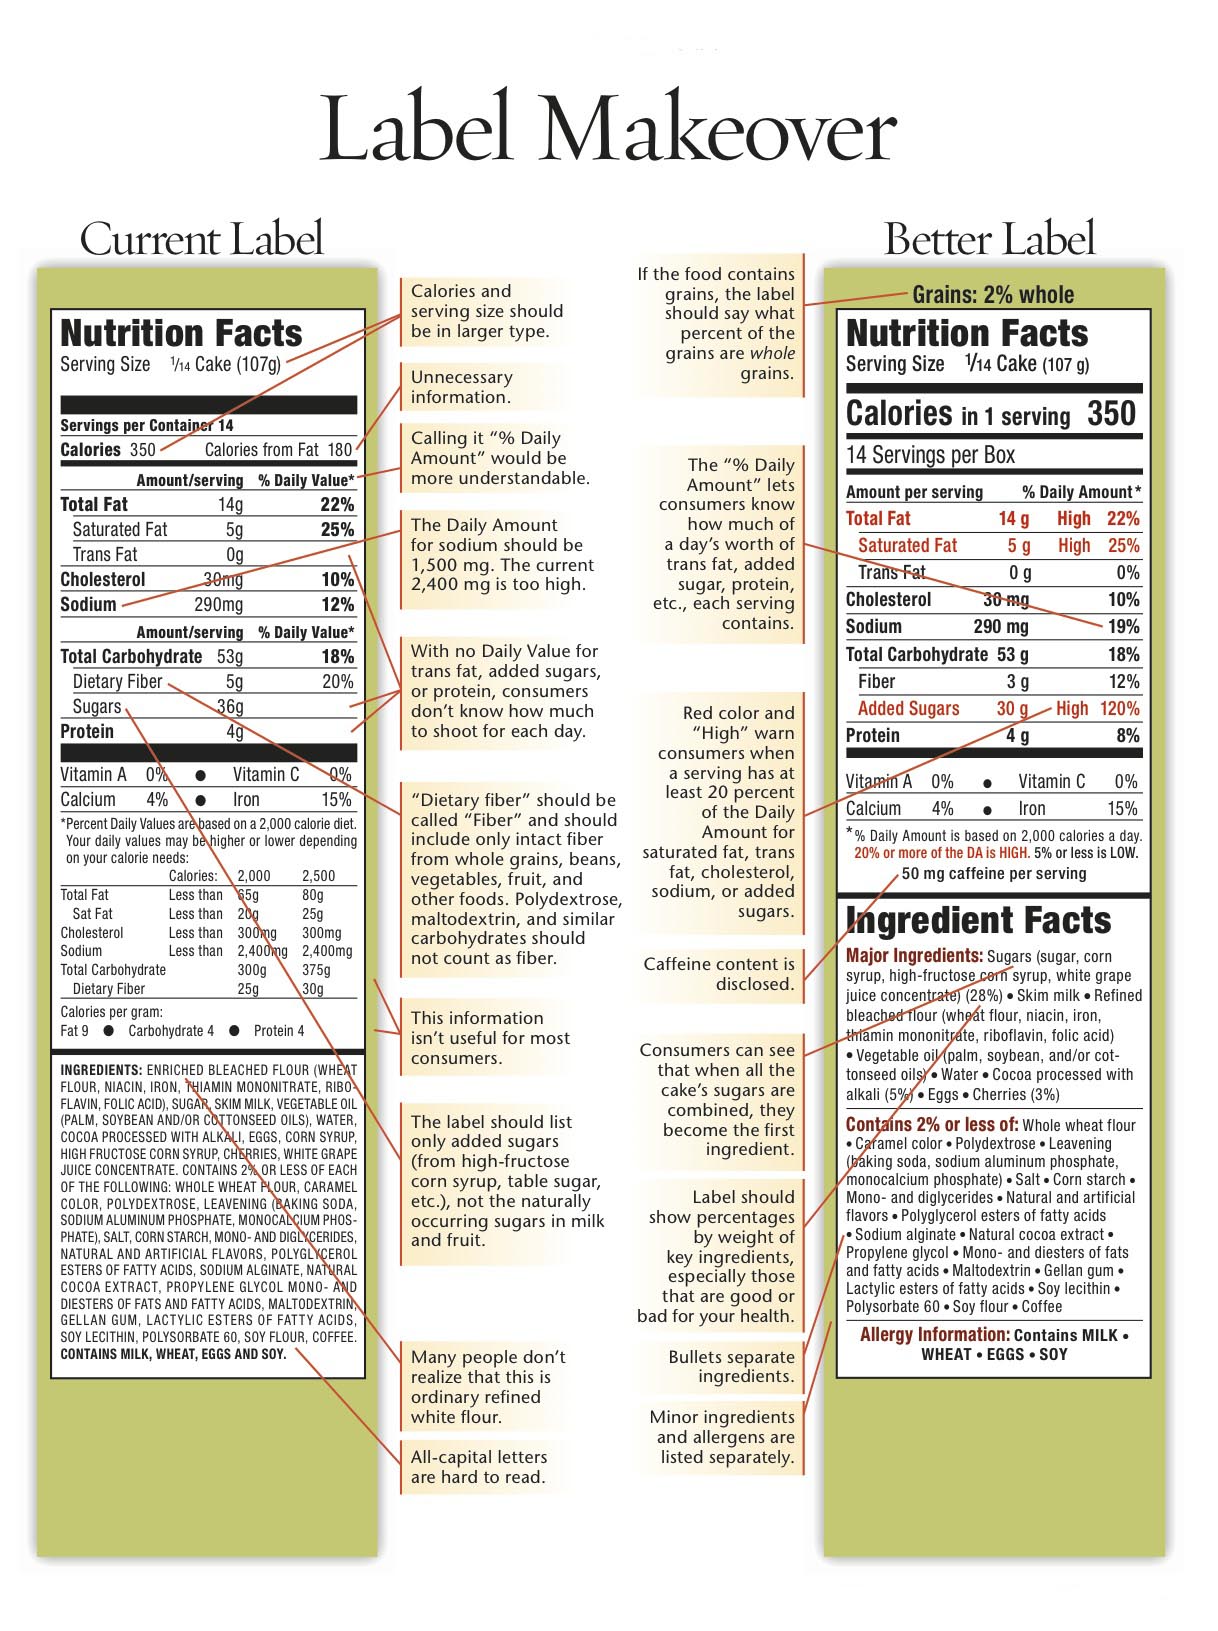 The New Nutrition Facts Label, Explained - A Love Letter To Food